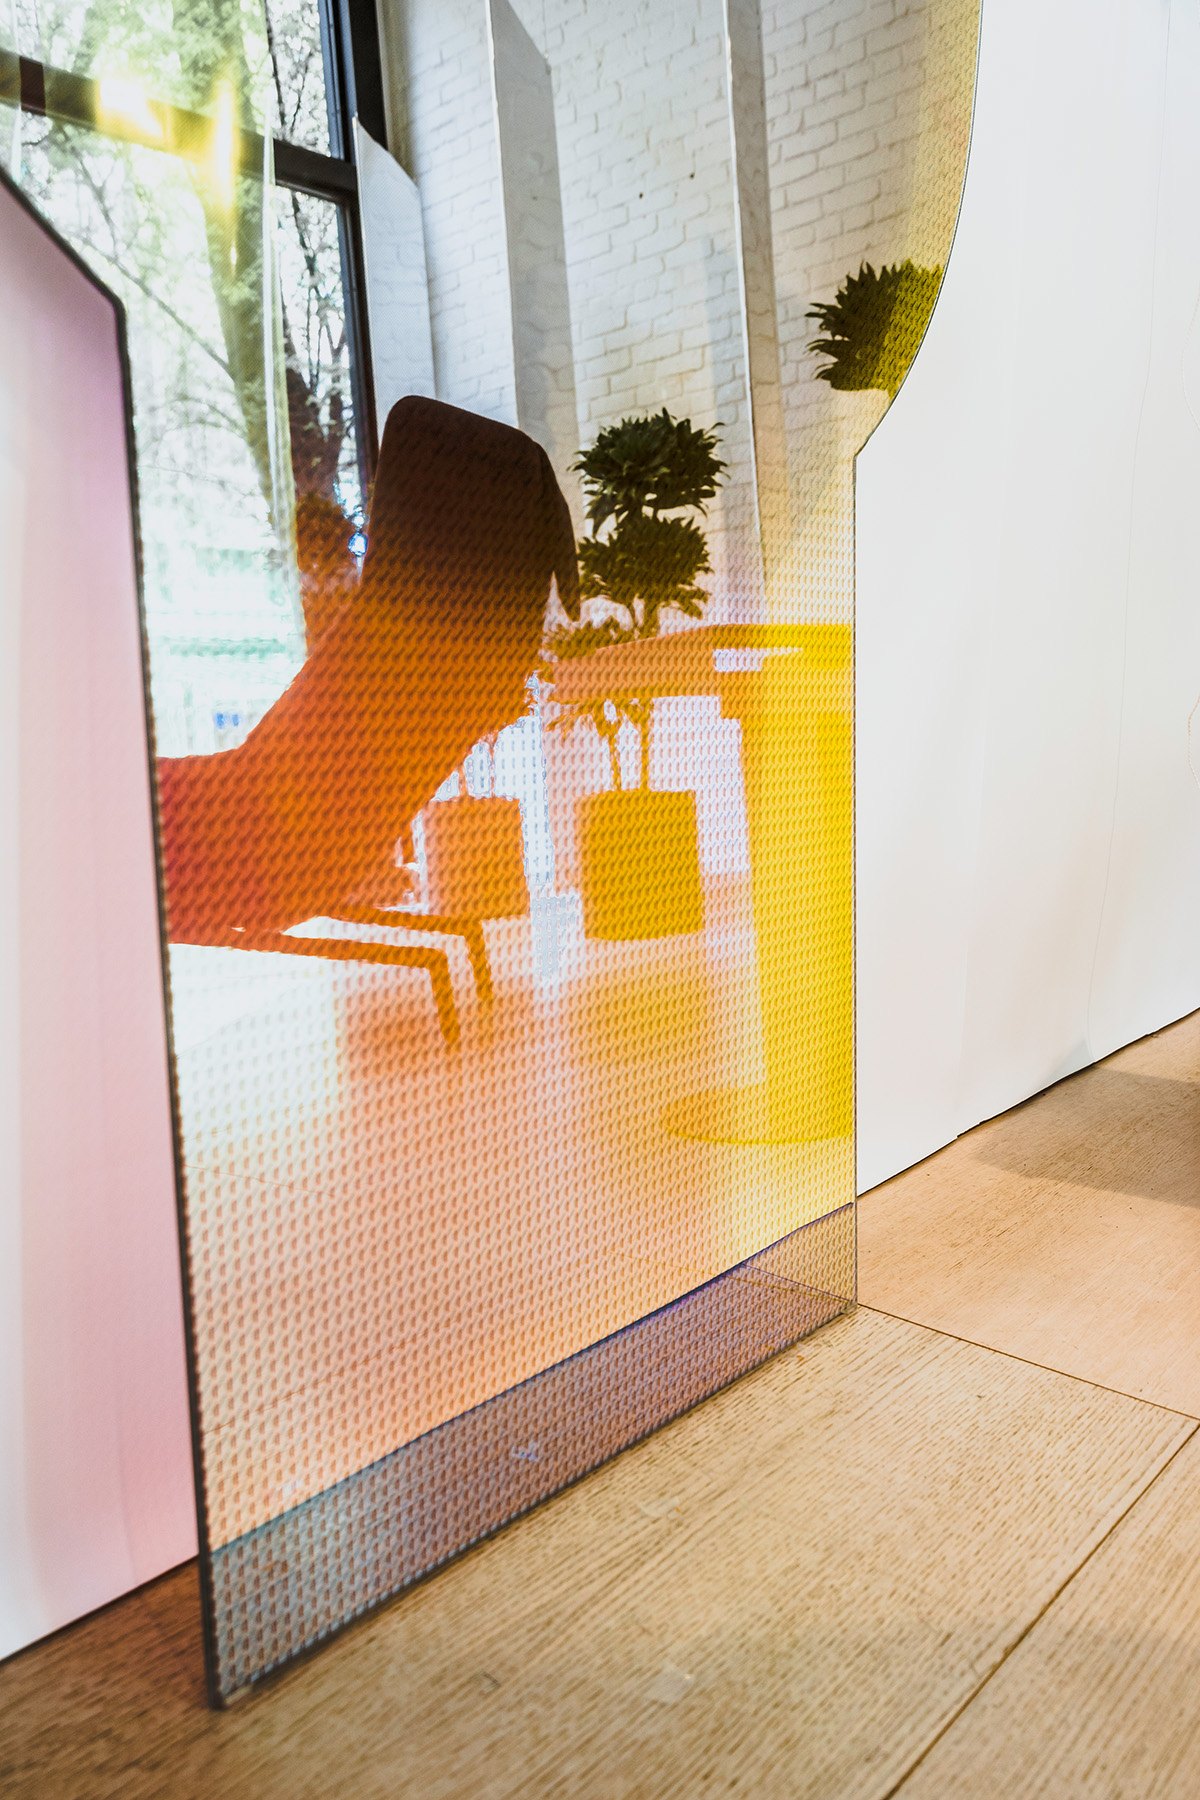 Sleek window and retail display installation at inform by Cutler, showing orange glass and reflections